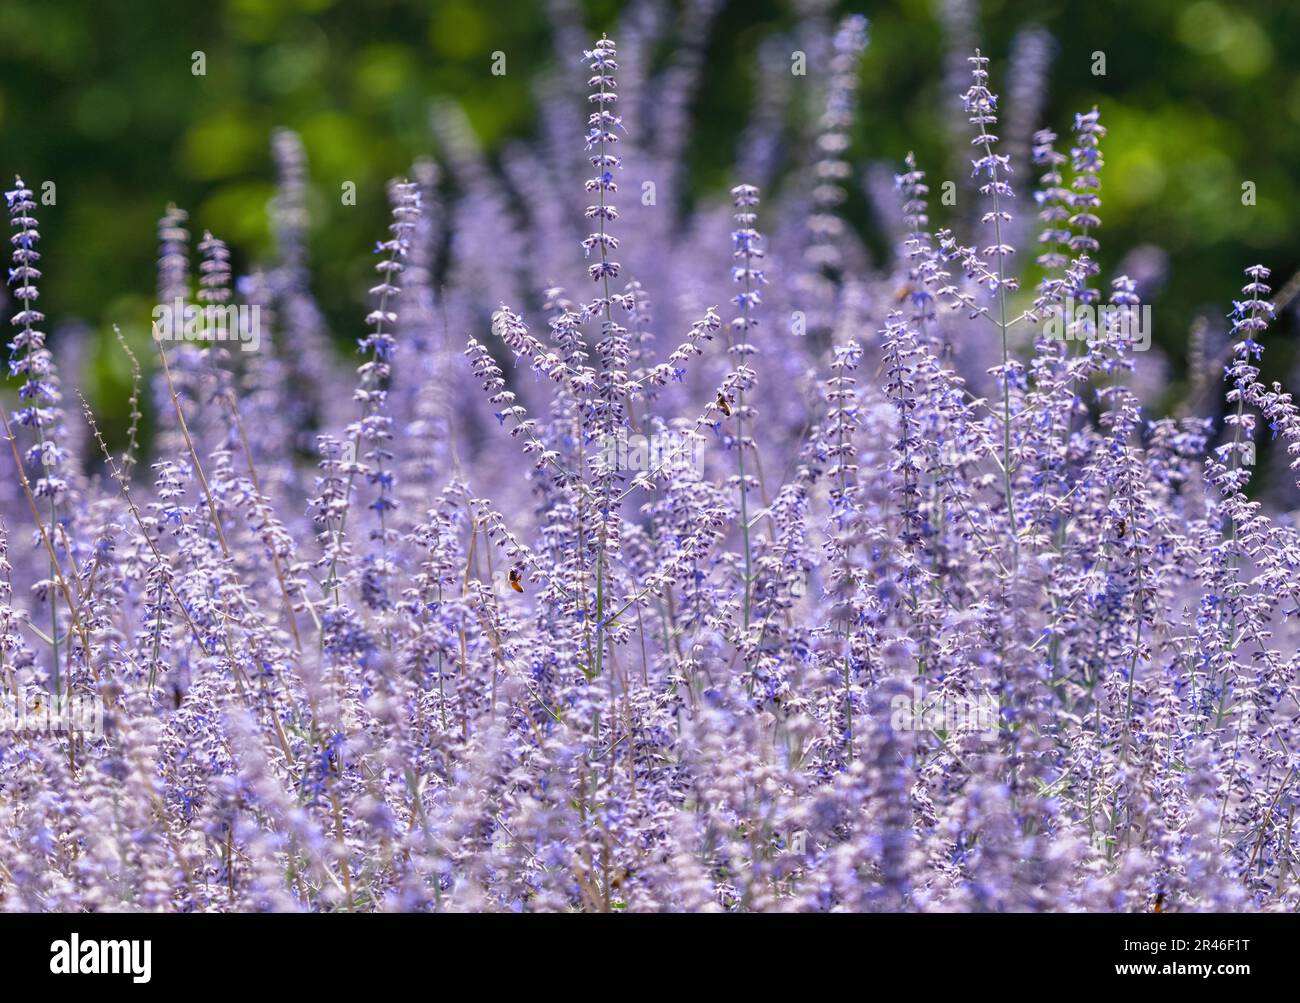 Russian Sage, a drought-tolerant, showy and hardy perennial, blooming in the garden. Stock Photo